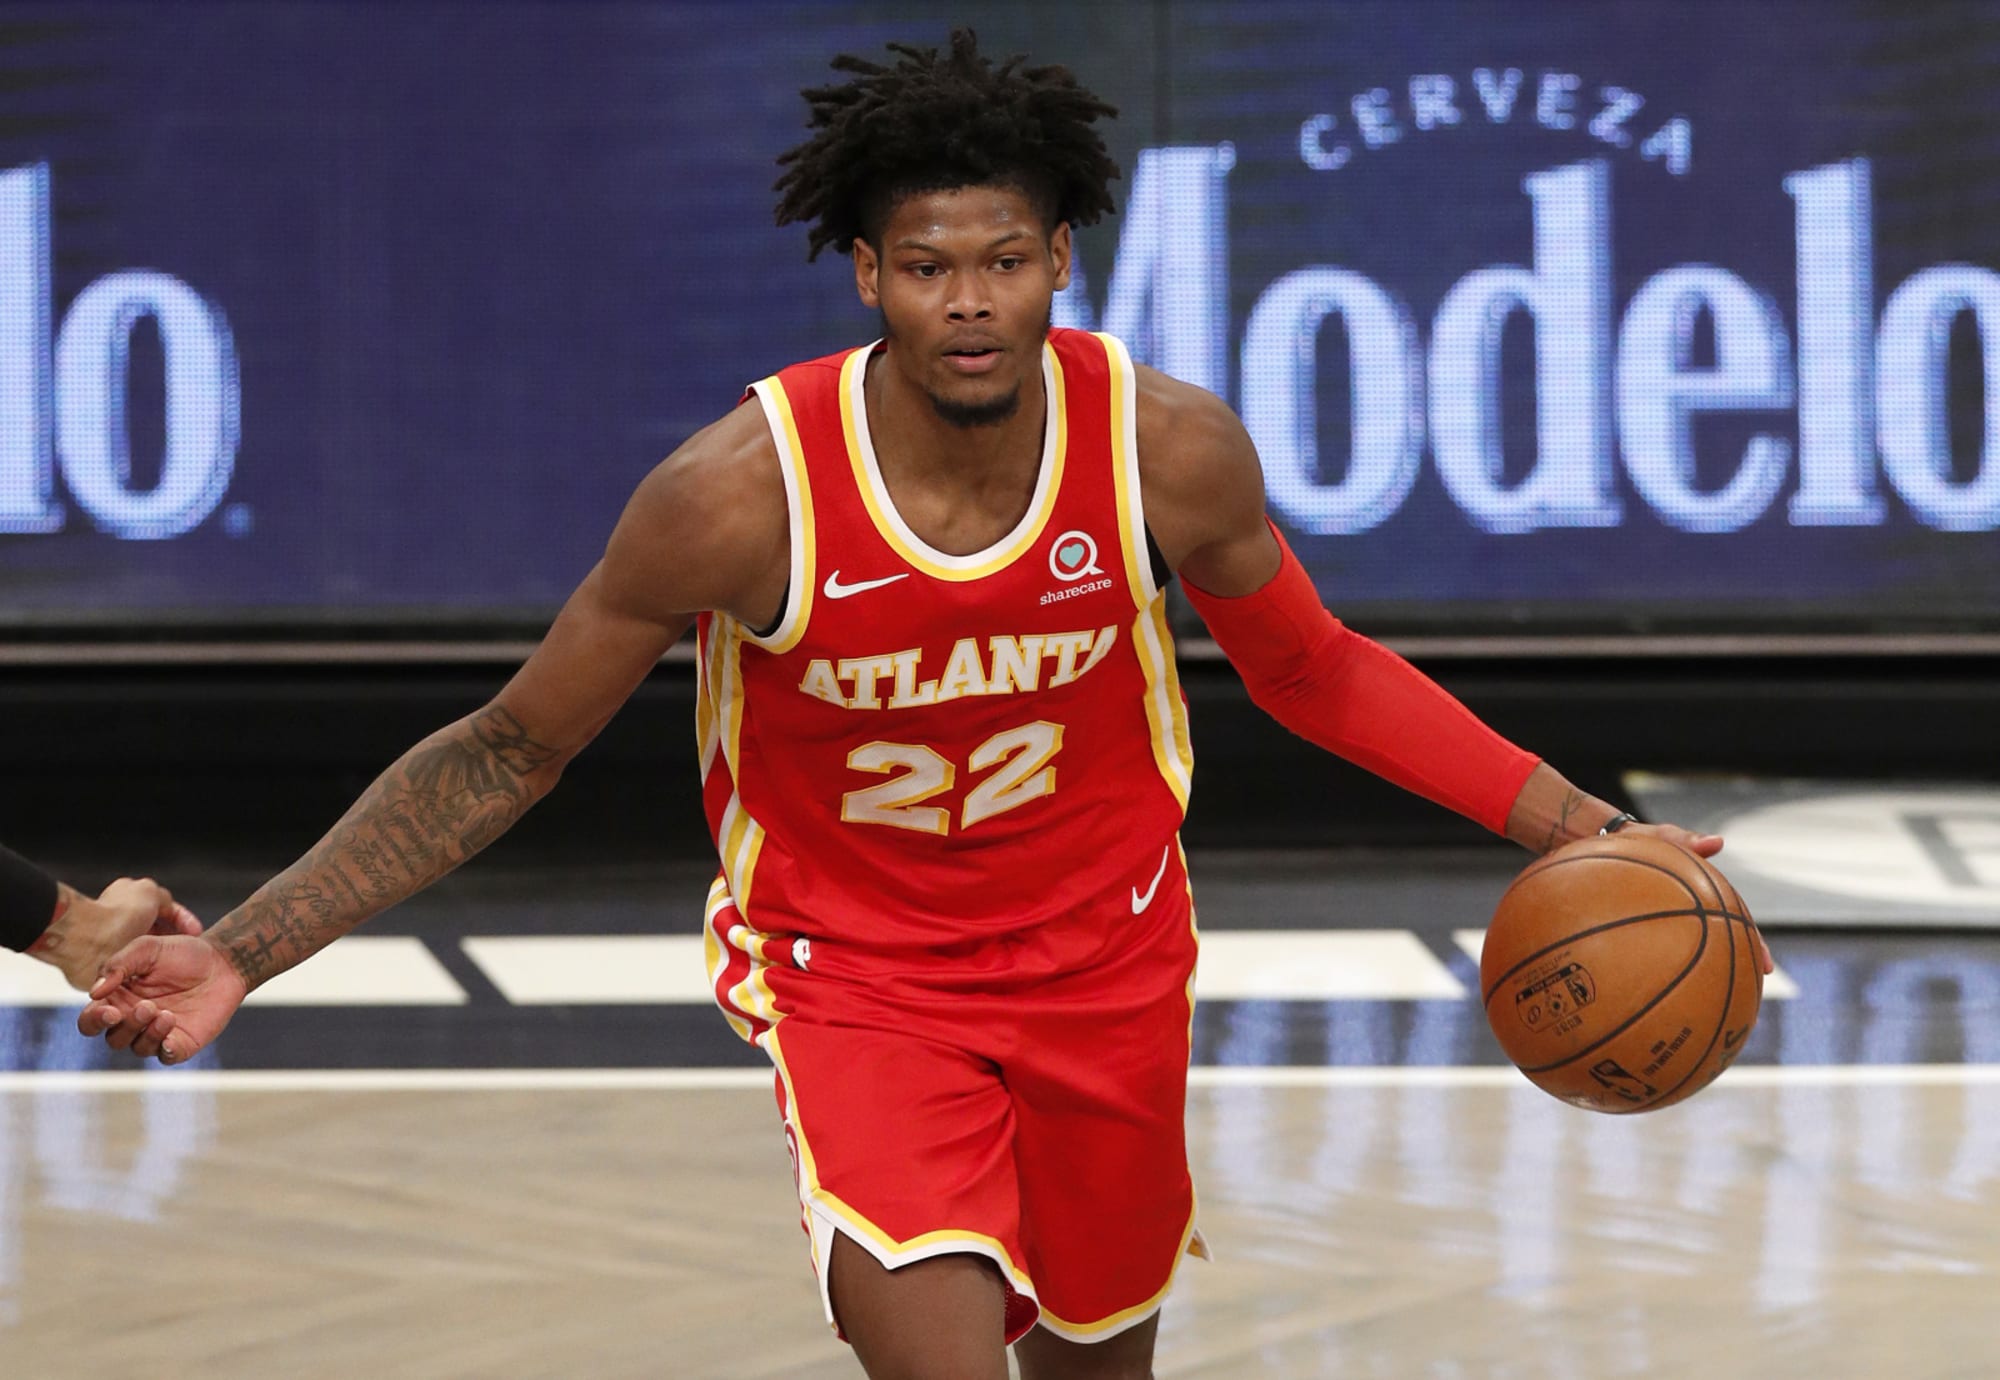 Cam Reddish can be a valuable piece for Atlanta Hawks this postseason